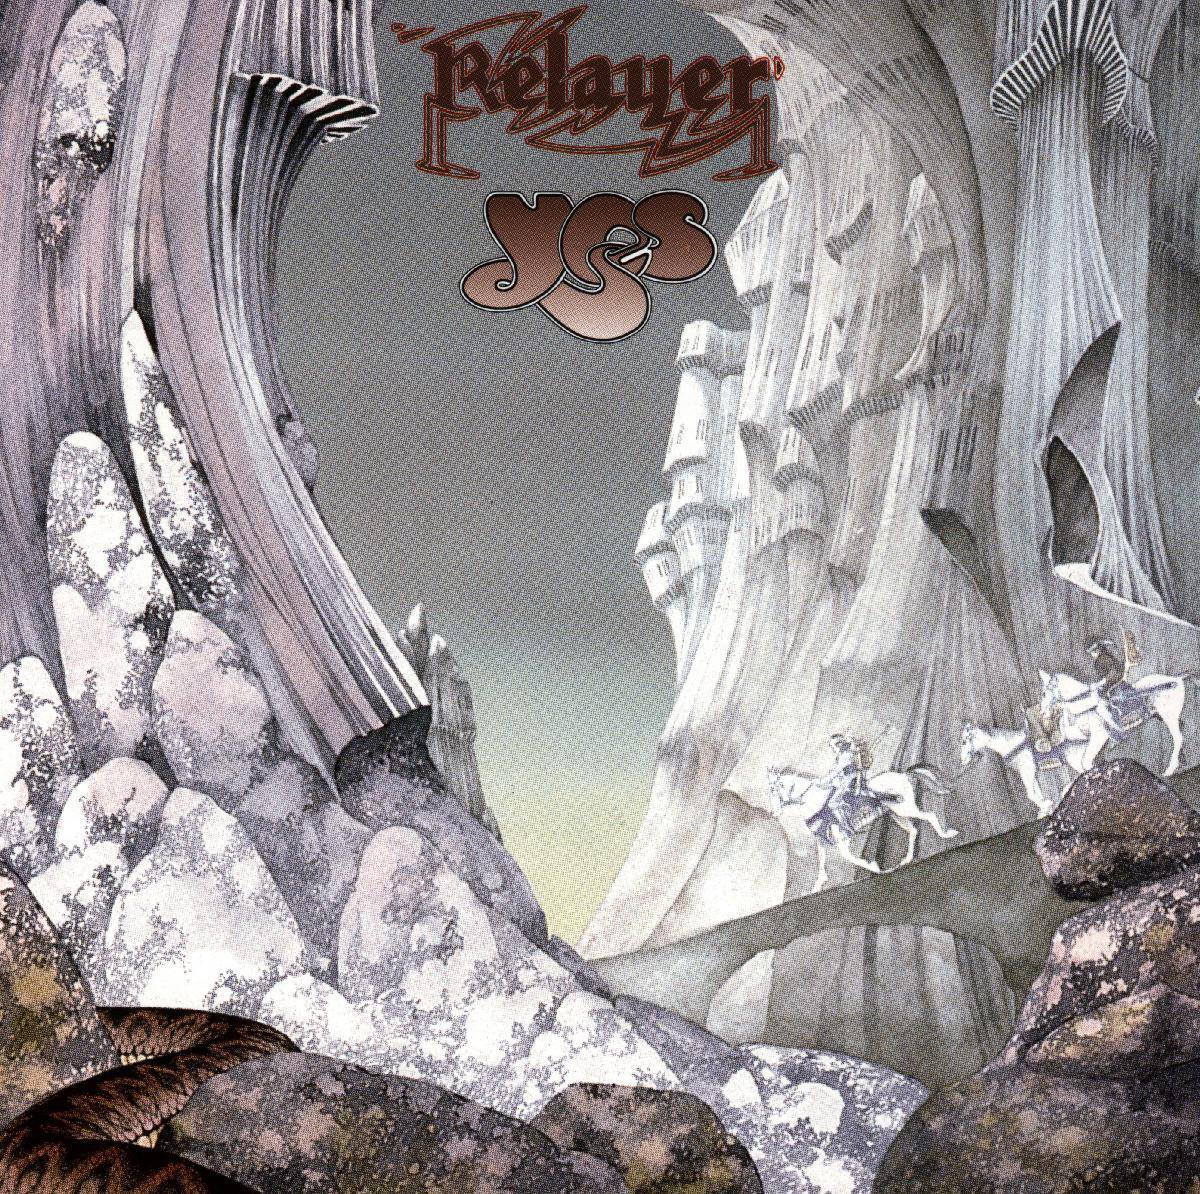 Relayer | Yes